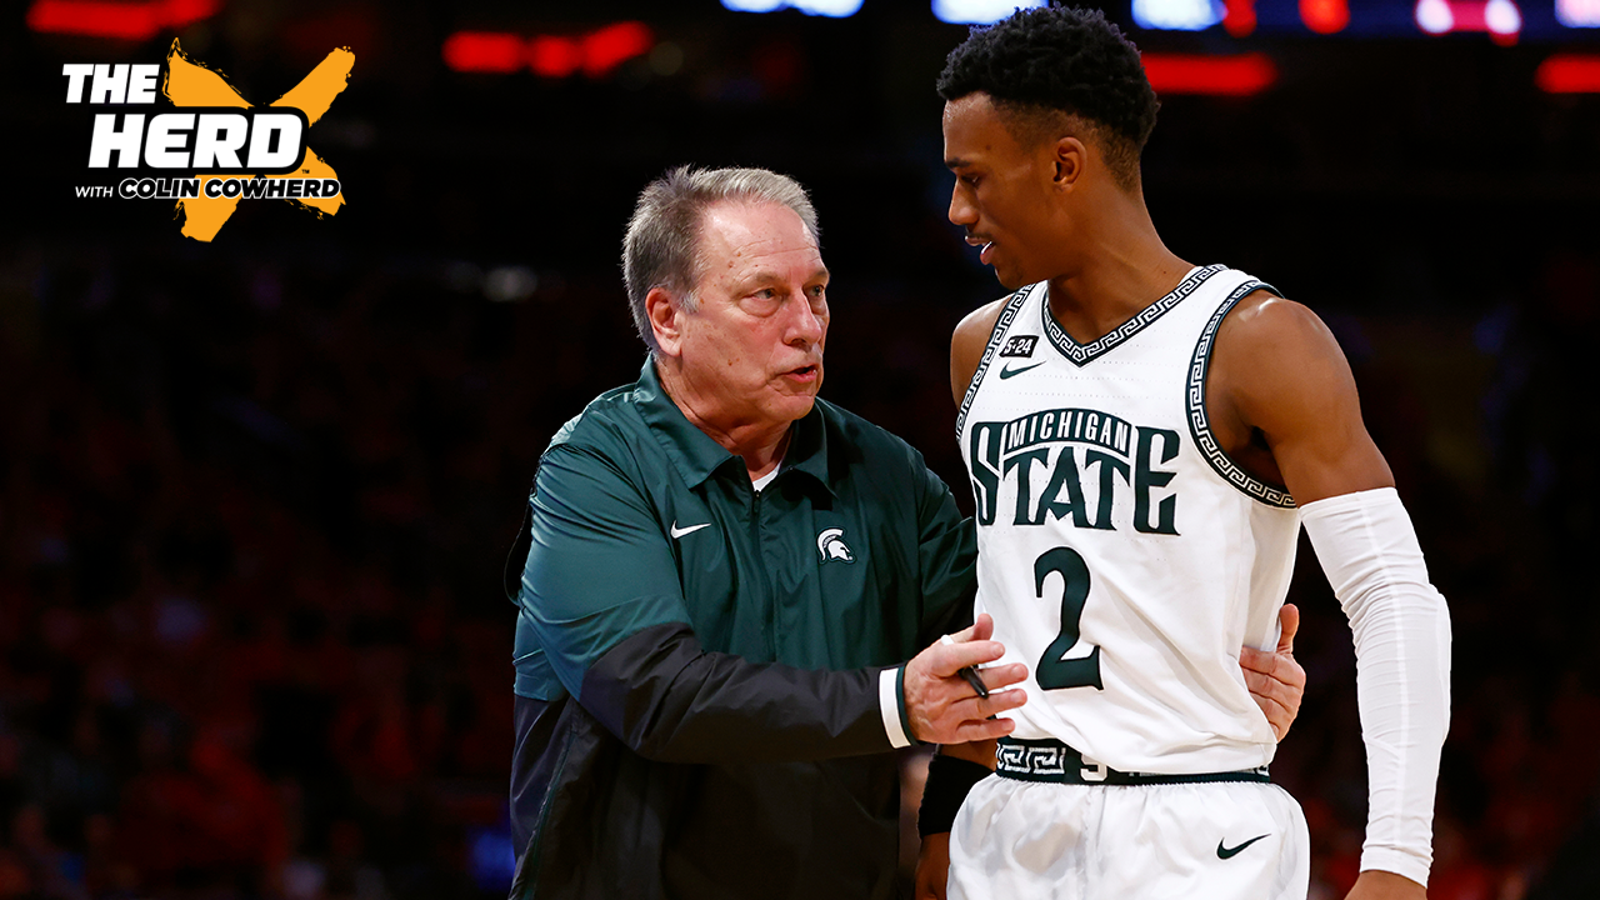 Tom Izzo explains the impacts of analytics and the transfer portal